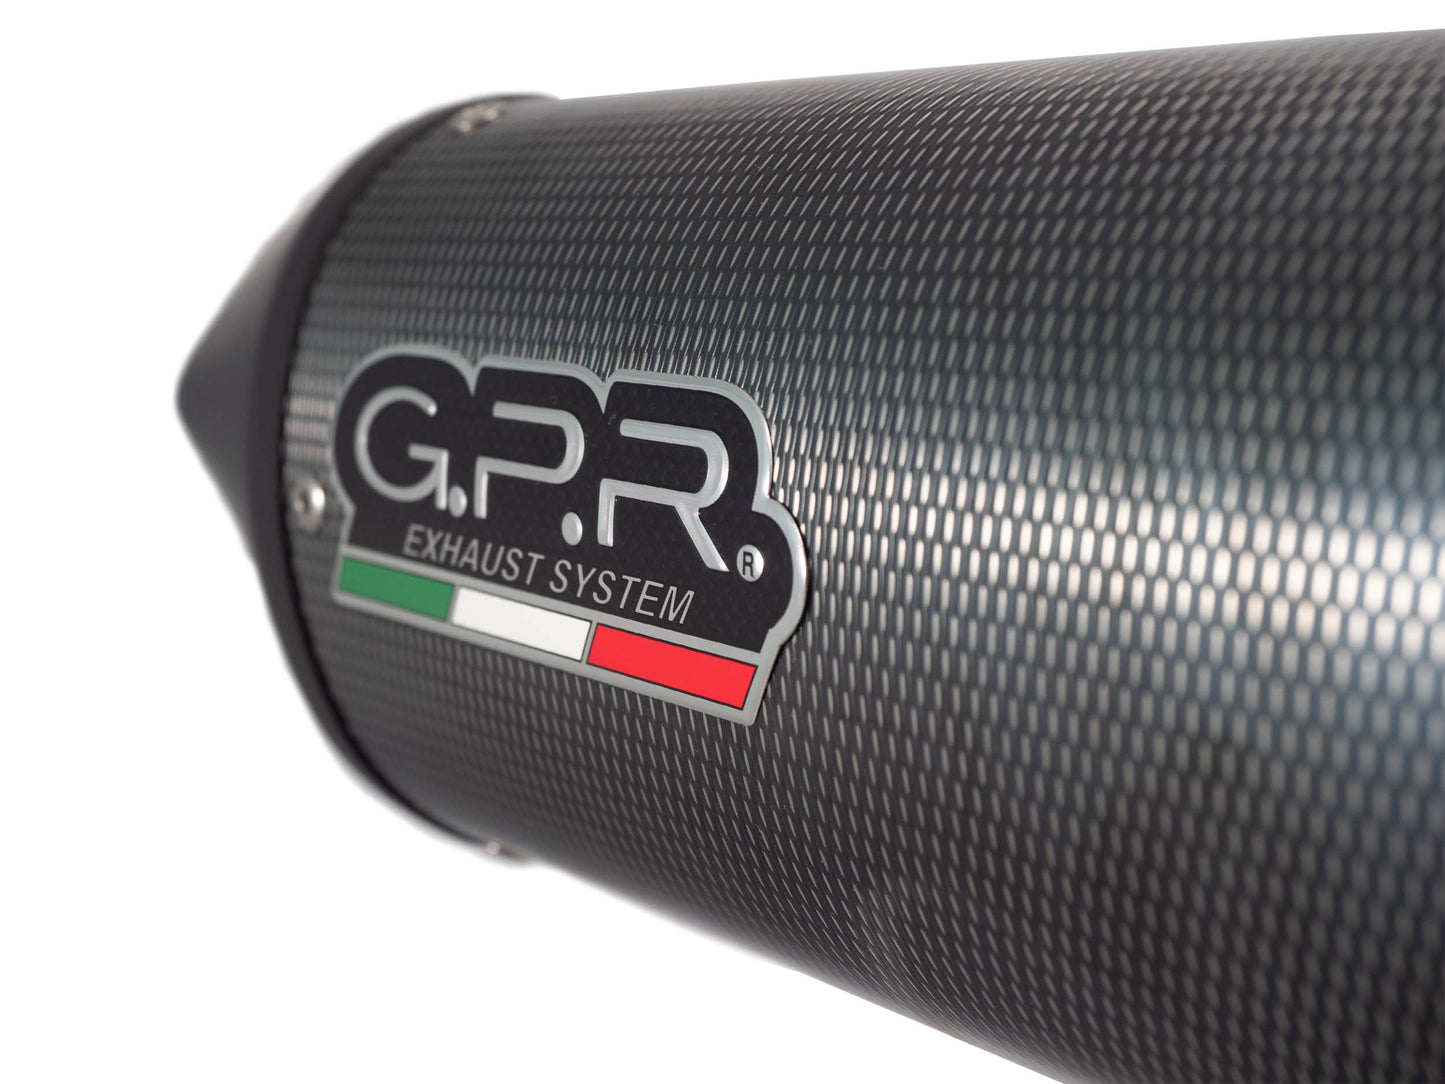 GPR Exhaust for Bmw F800R 2015-2016, Furore Poppy, Slip-on Exhaust Including Removable DB Killer and Link Pipe